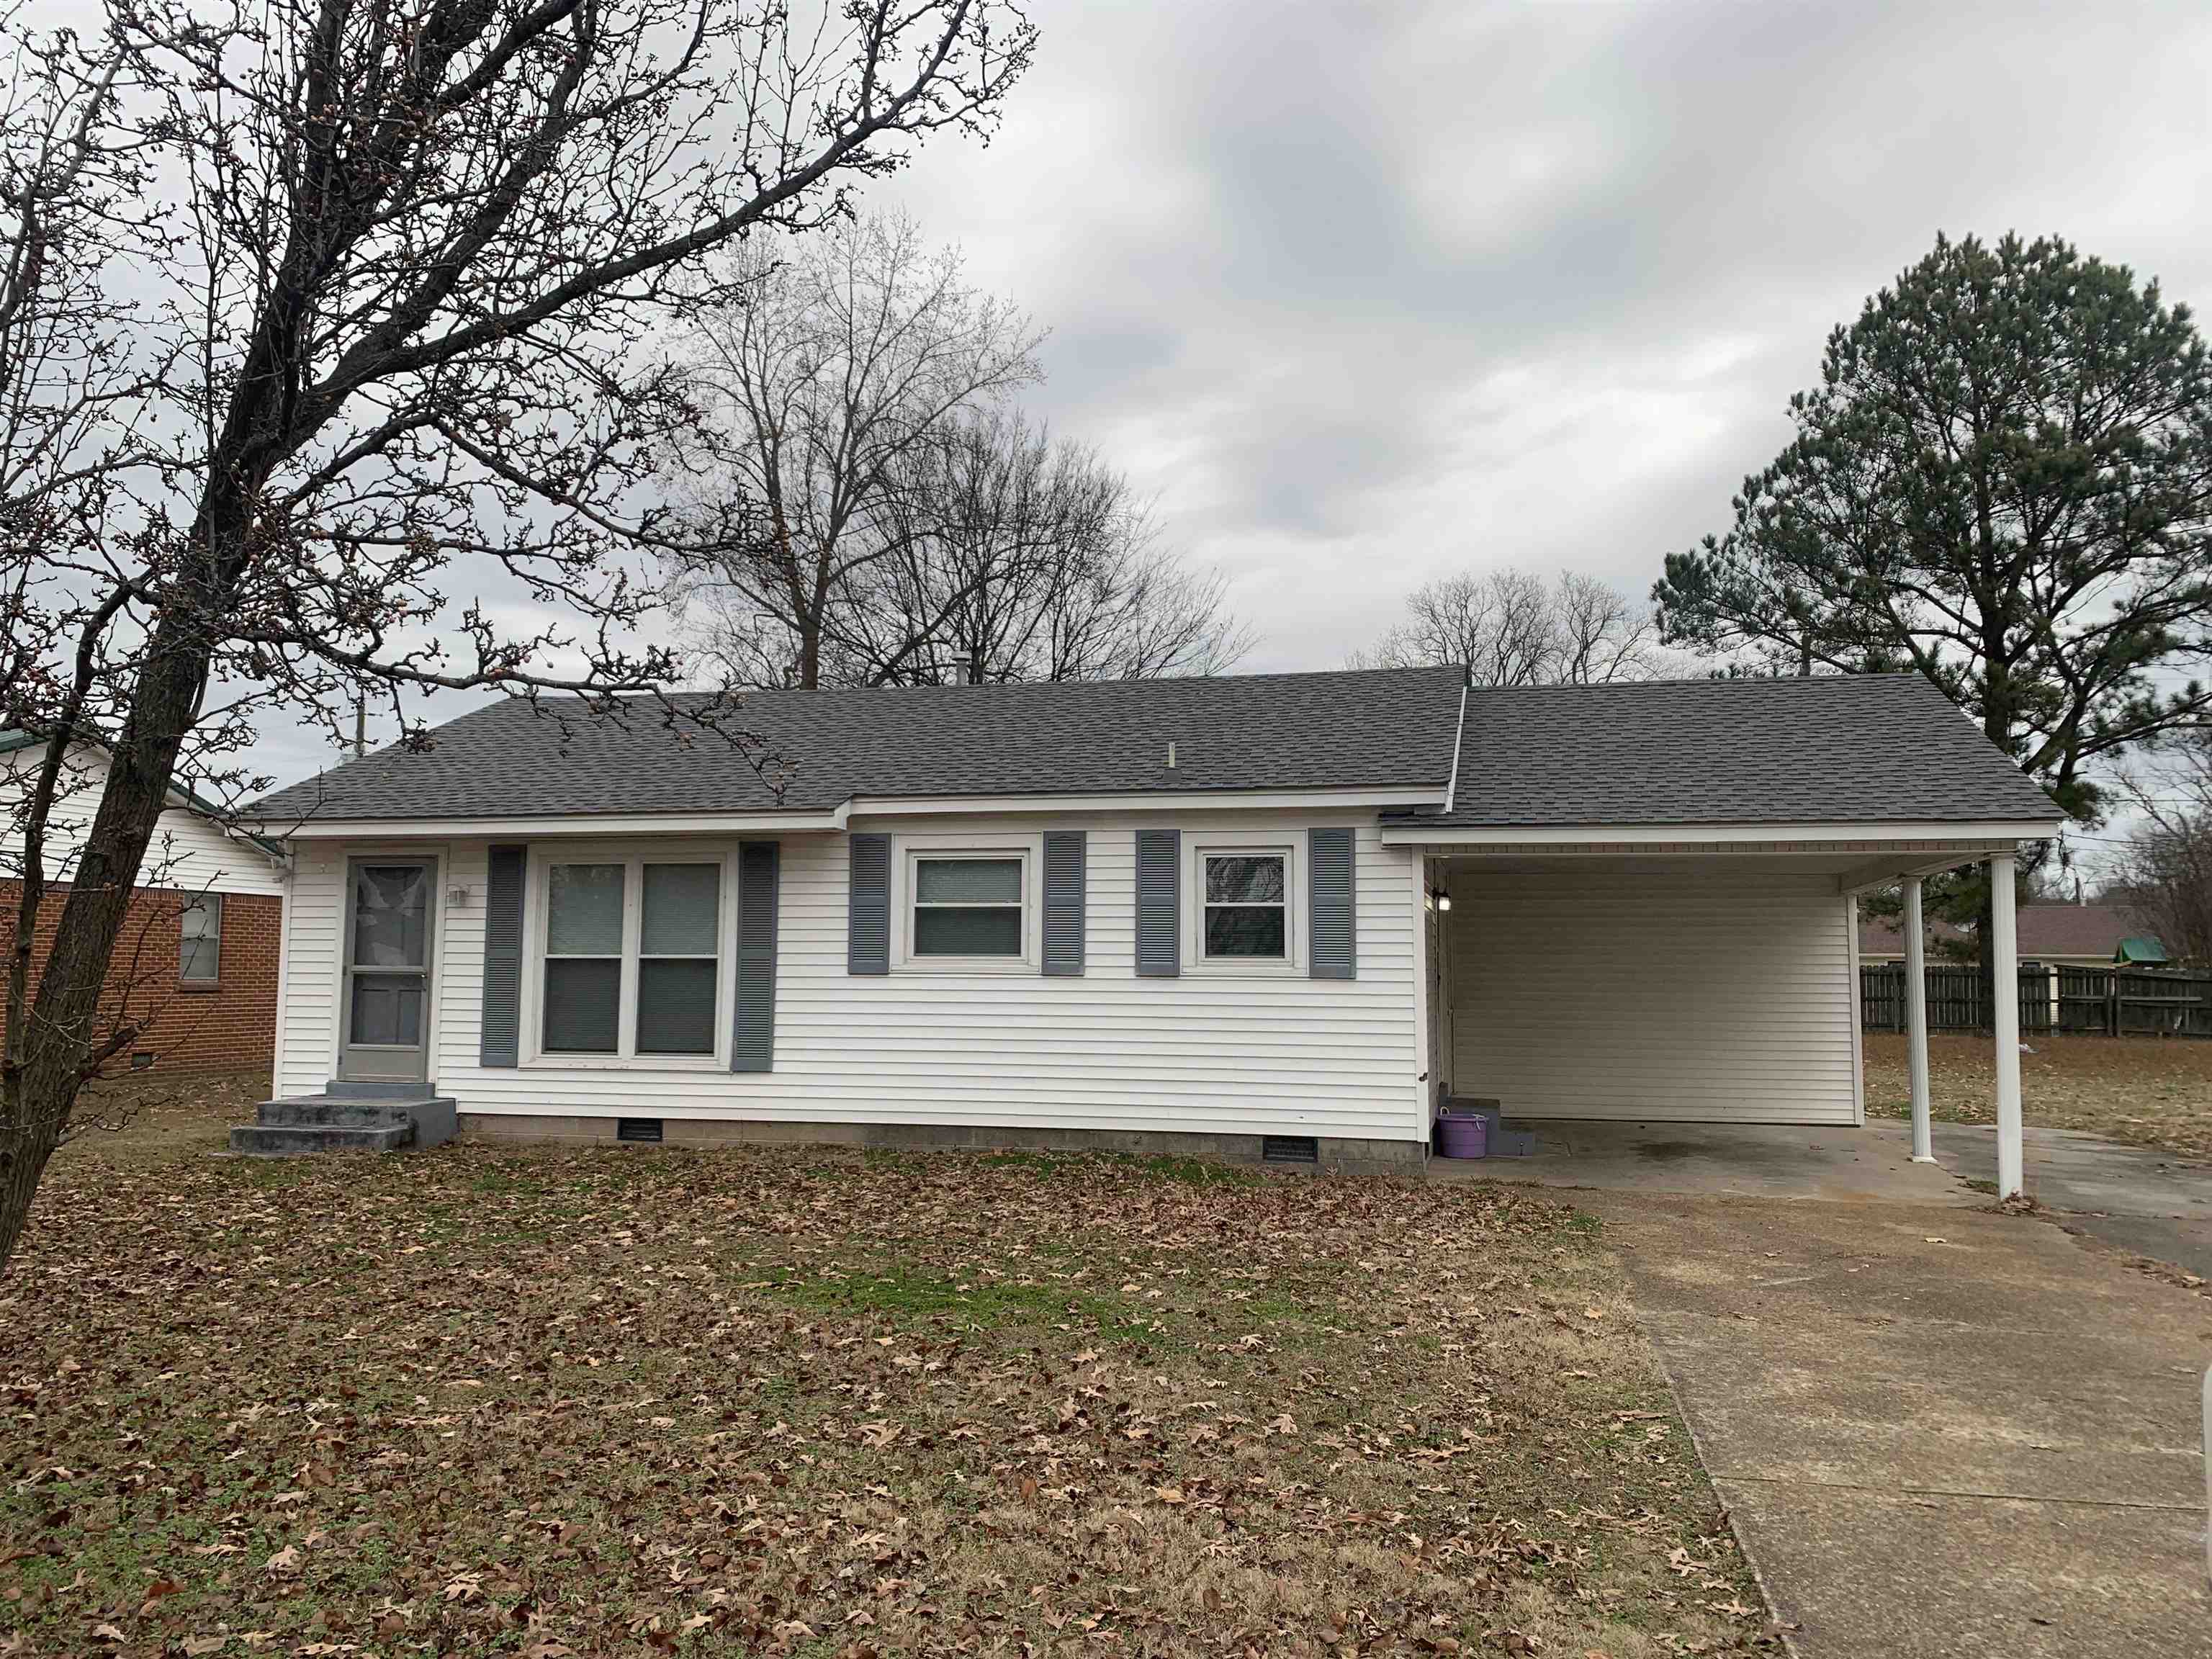 Cute 2 bedroom 1 bath with hardwood floors. This home has a nice size kitchen and living room and a separate laundry room. Call for more information. Missy Thurmond 731-676-7686